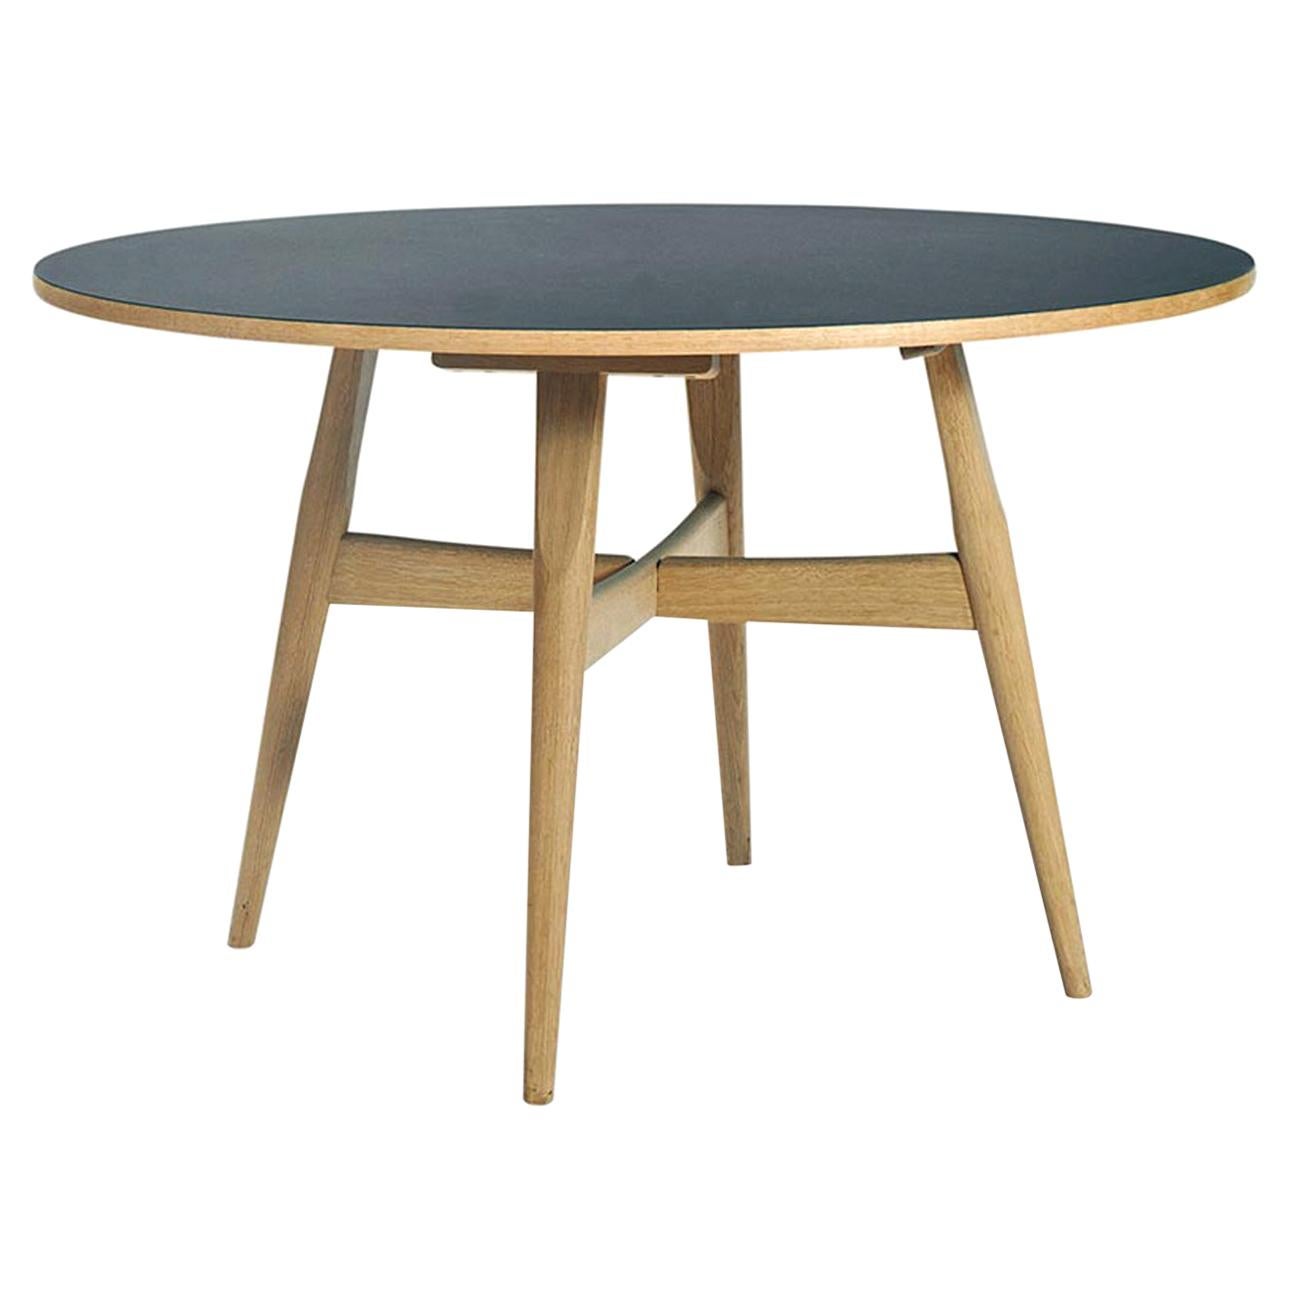 Hans Wegner GE-526 Dining Table, Veneered Top in Oak with Legs in Stained Beech For Sale